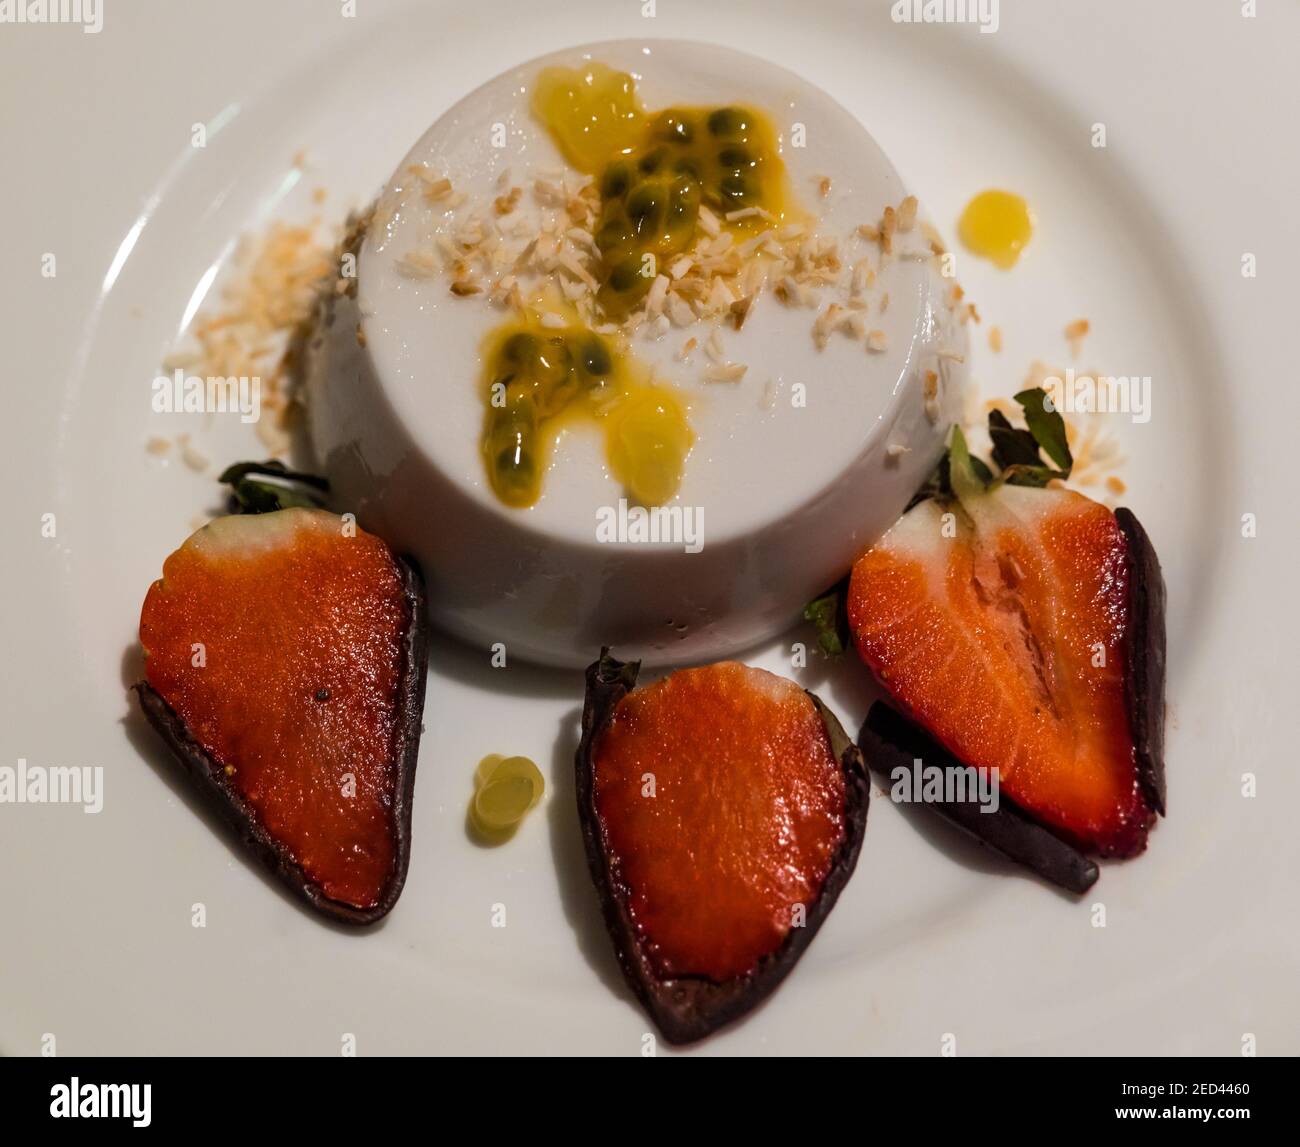 Fine dining dessert plate: coconut panna cotta, passionfruit, pineapple gel and chocolate dipped strawberries by chef Paul Wedgwood, Scotland, UK Stock Photo